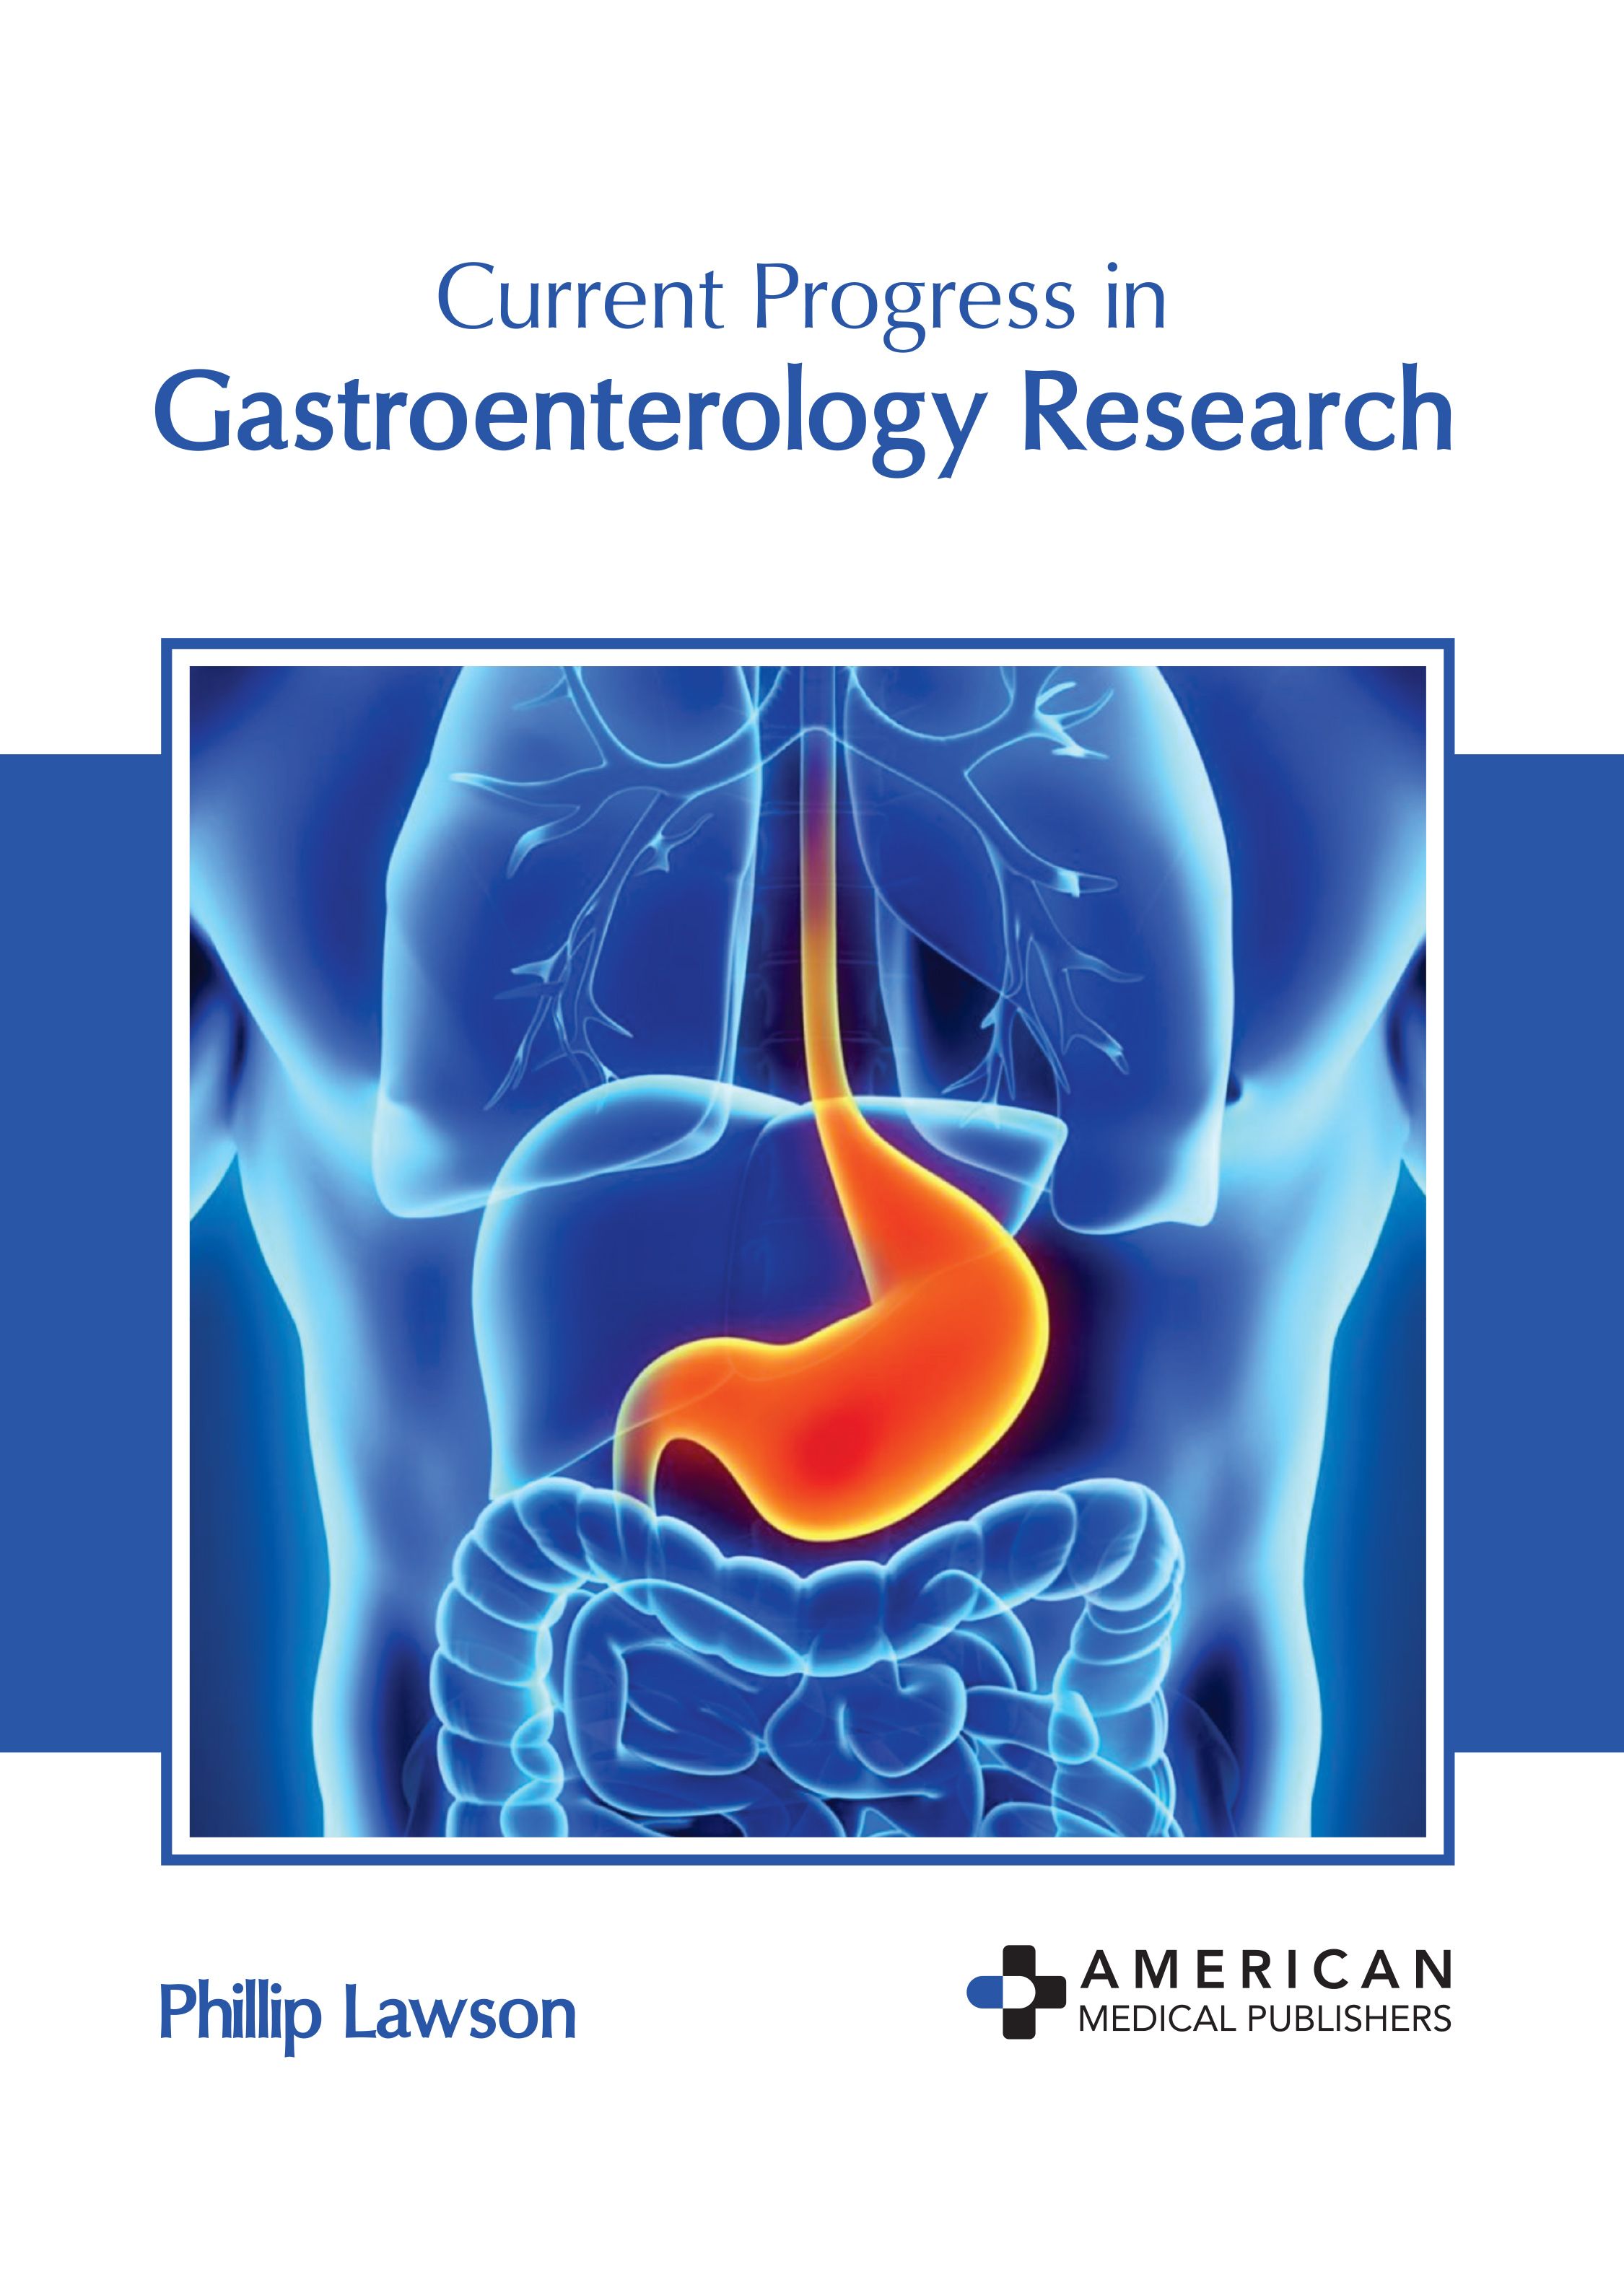 

exclusive-publishers/american-medical-publishers/current-progress-in-gastroenterology-research-9798887400358